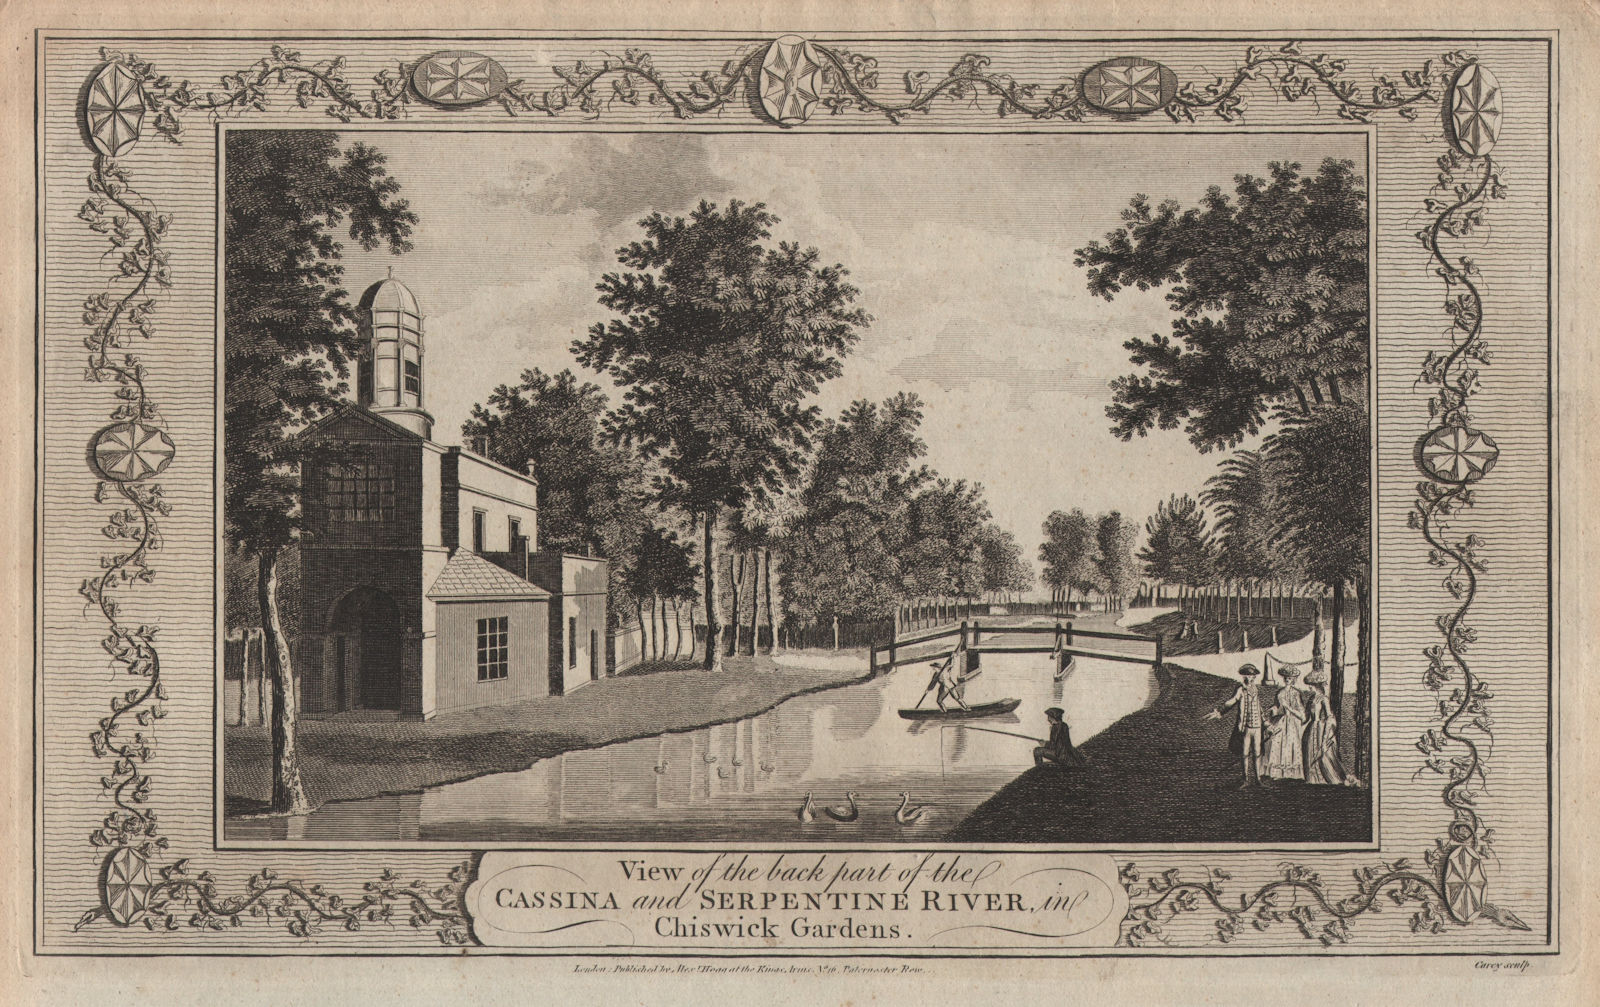 The Cassina and Serpentine River, Chiswick House & Gardens. THORNTON 1784